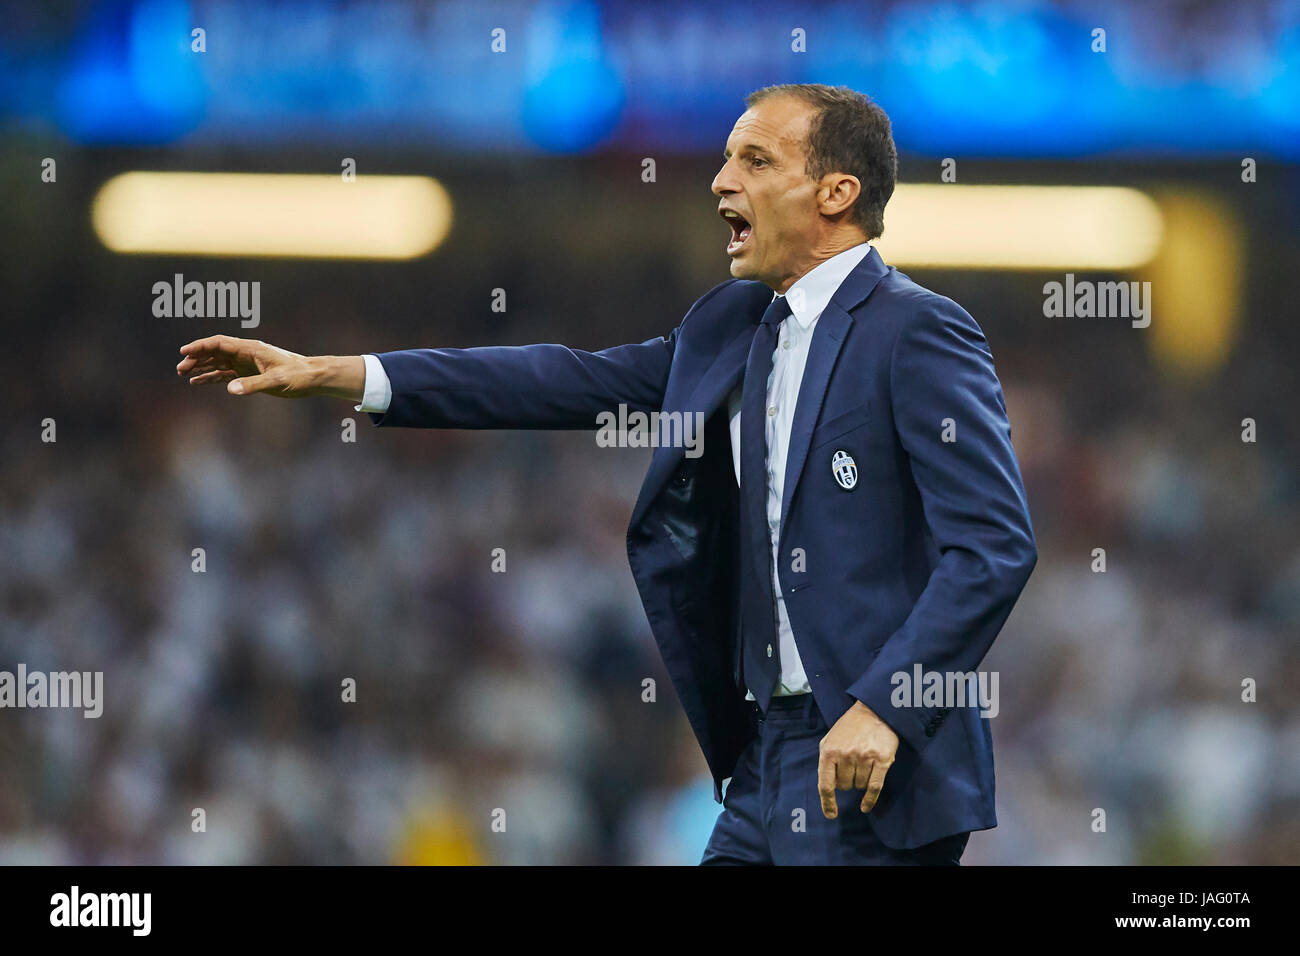 UEFA Champions League, Final, Cardiff, June 03 2017  Massimiliano ALLEGRI, JUVE Trainer Gesticulates and giving instructions, action, single image, ge Stock Photo